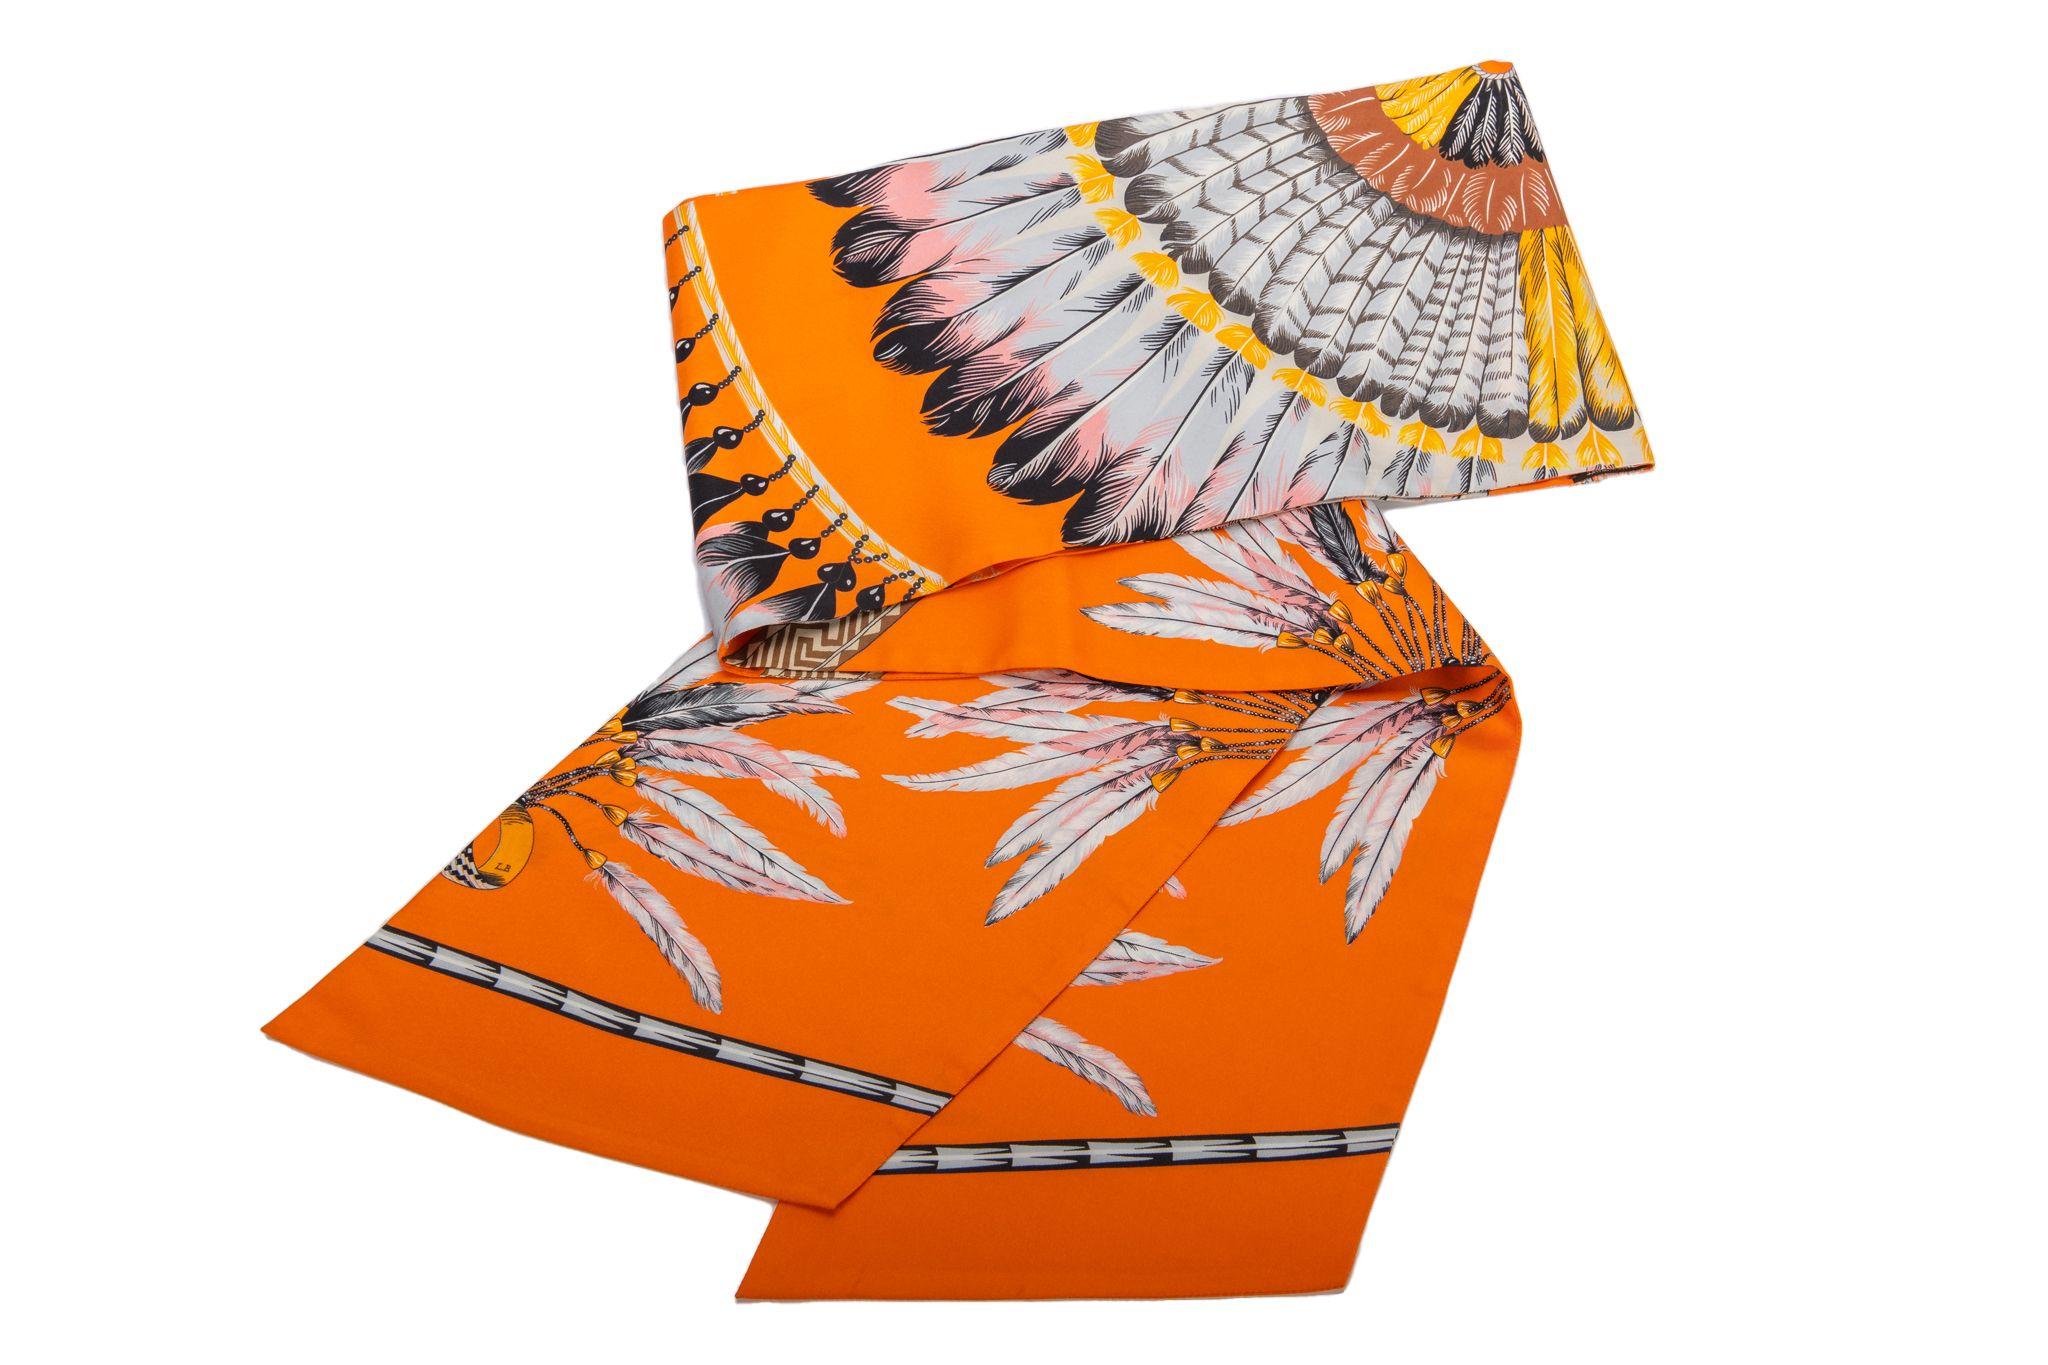 Hermès Brazil maxi twilly scarf with feather floral detail. Hand-rolled edges. Discontinued size. New in box.
